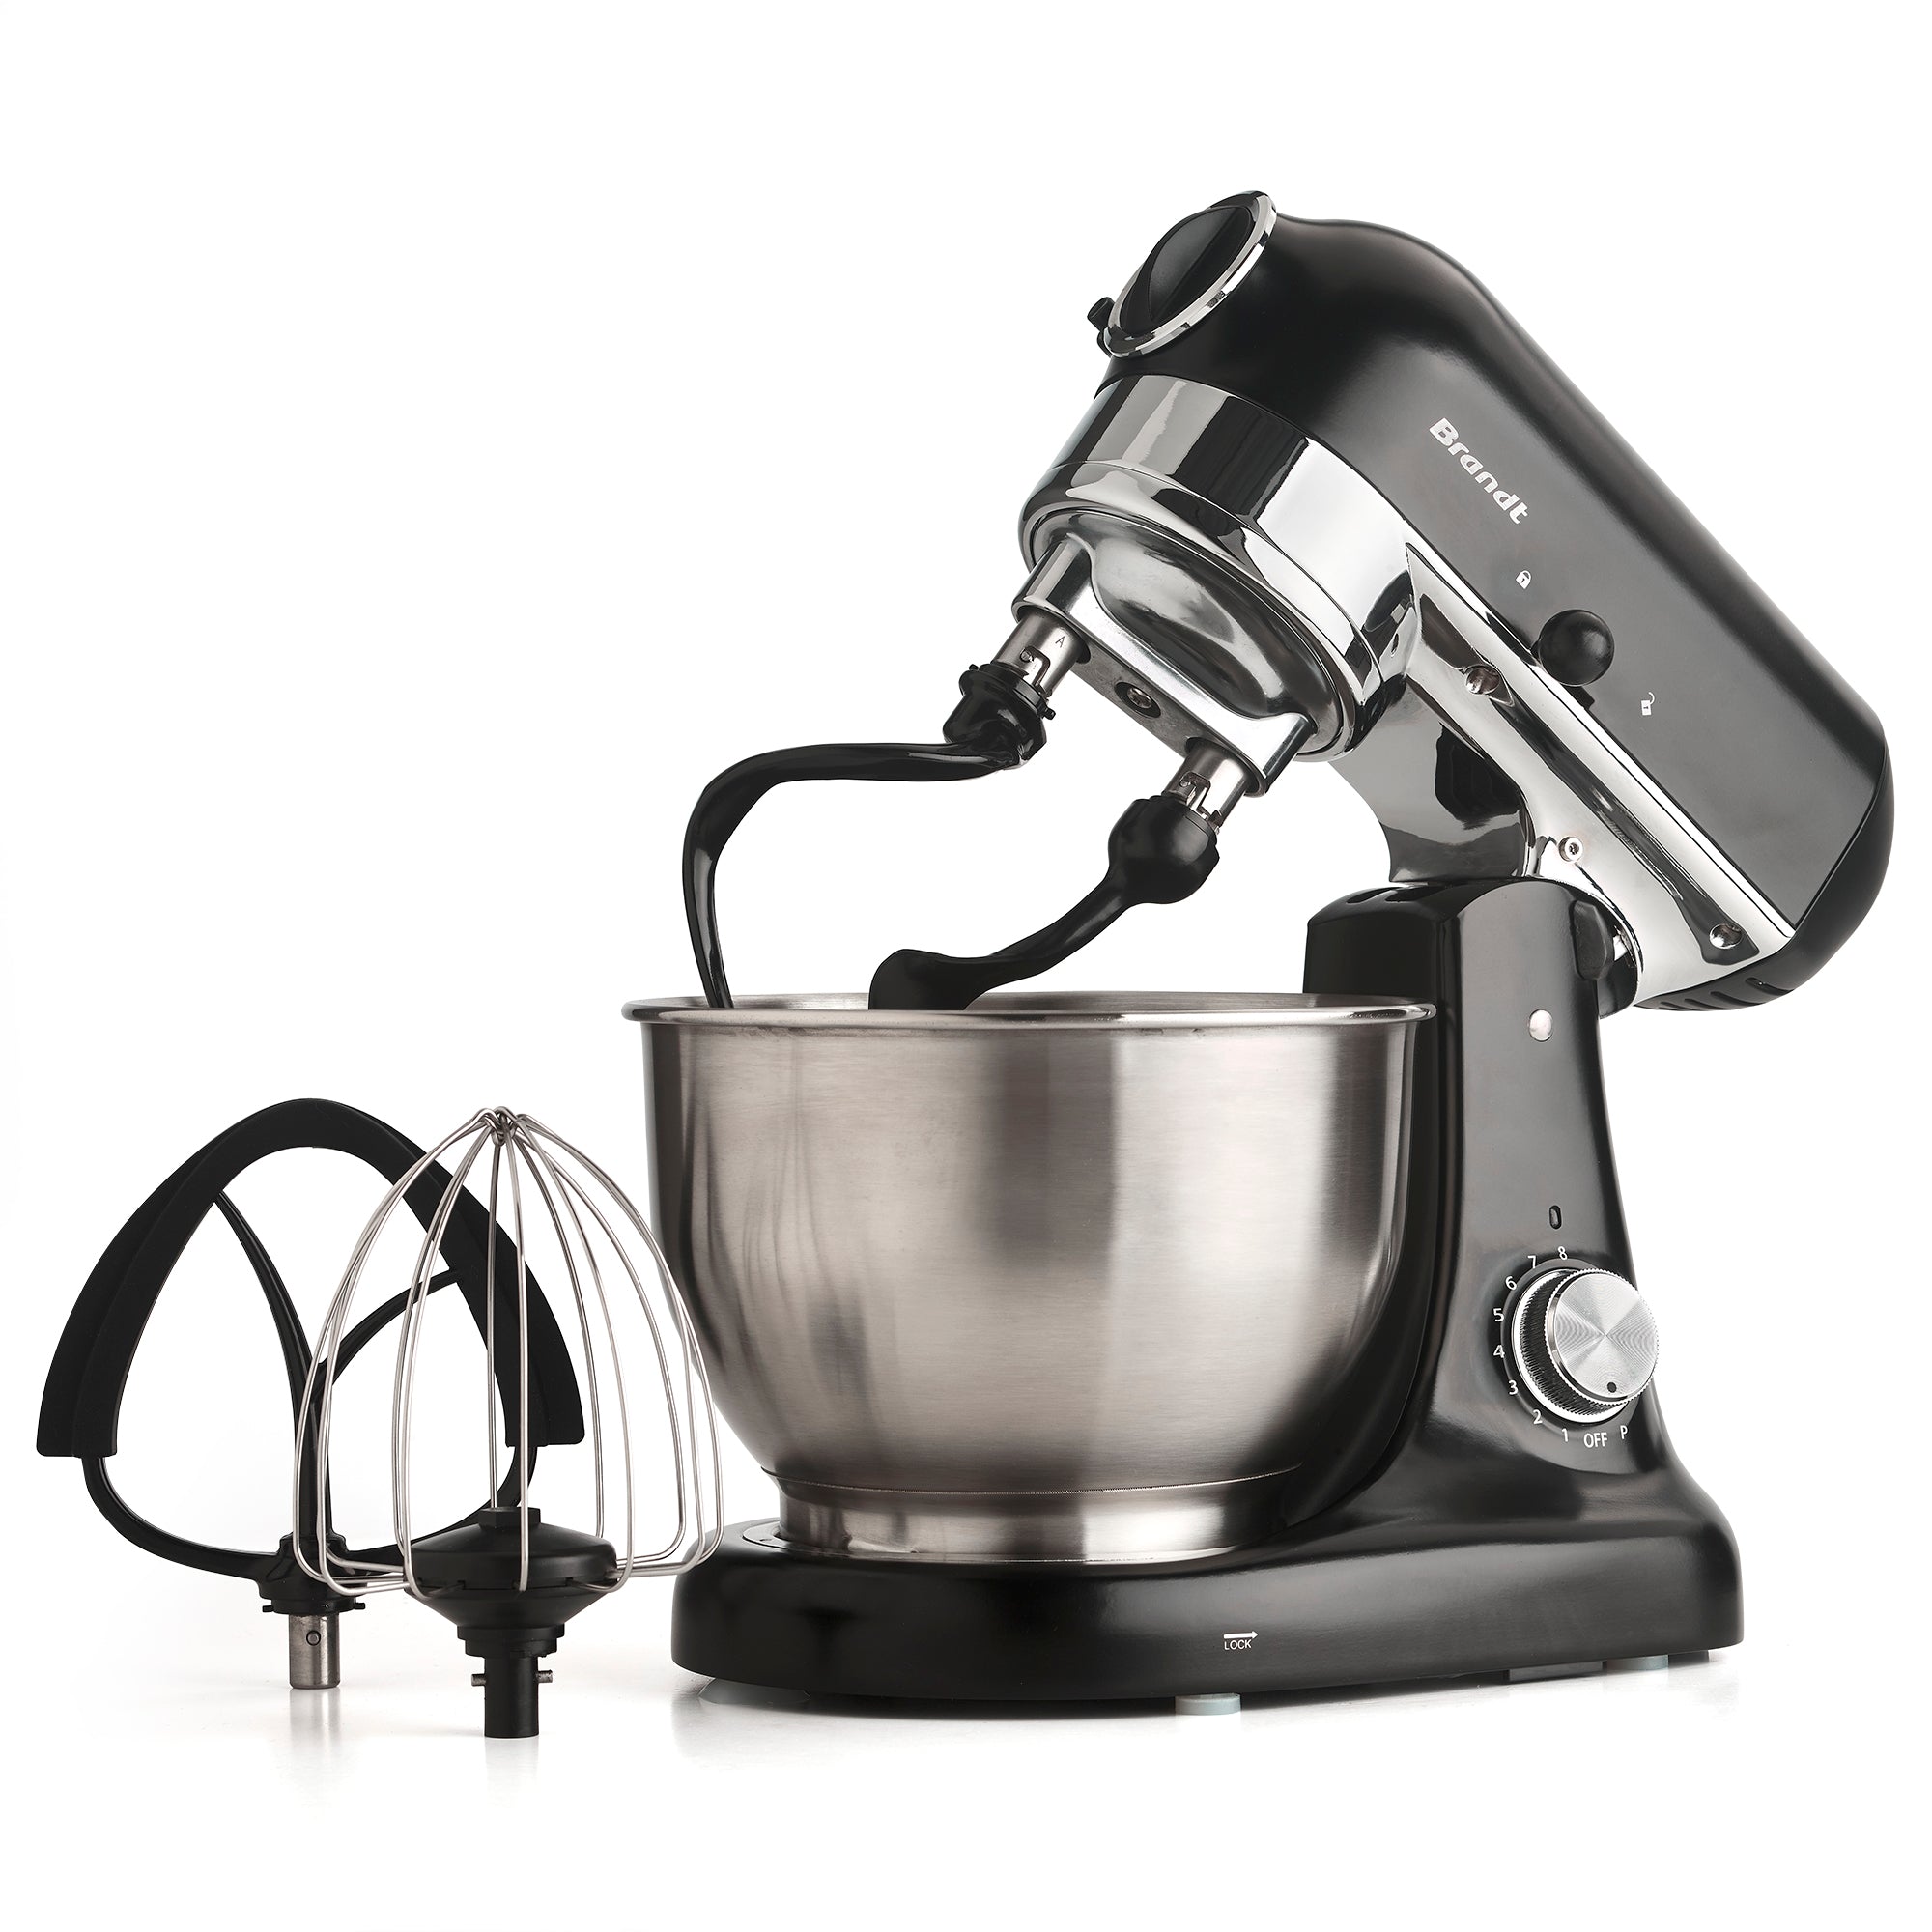 This KitchenAid pasta attachment is on sale for $127 off on